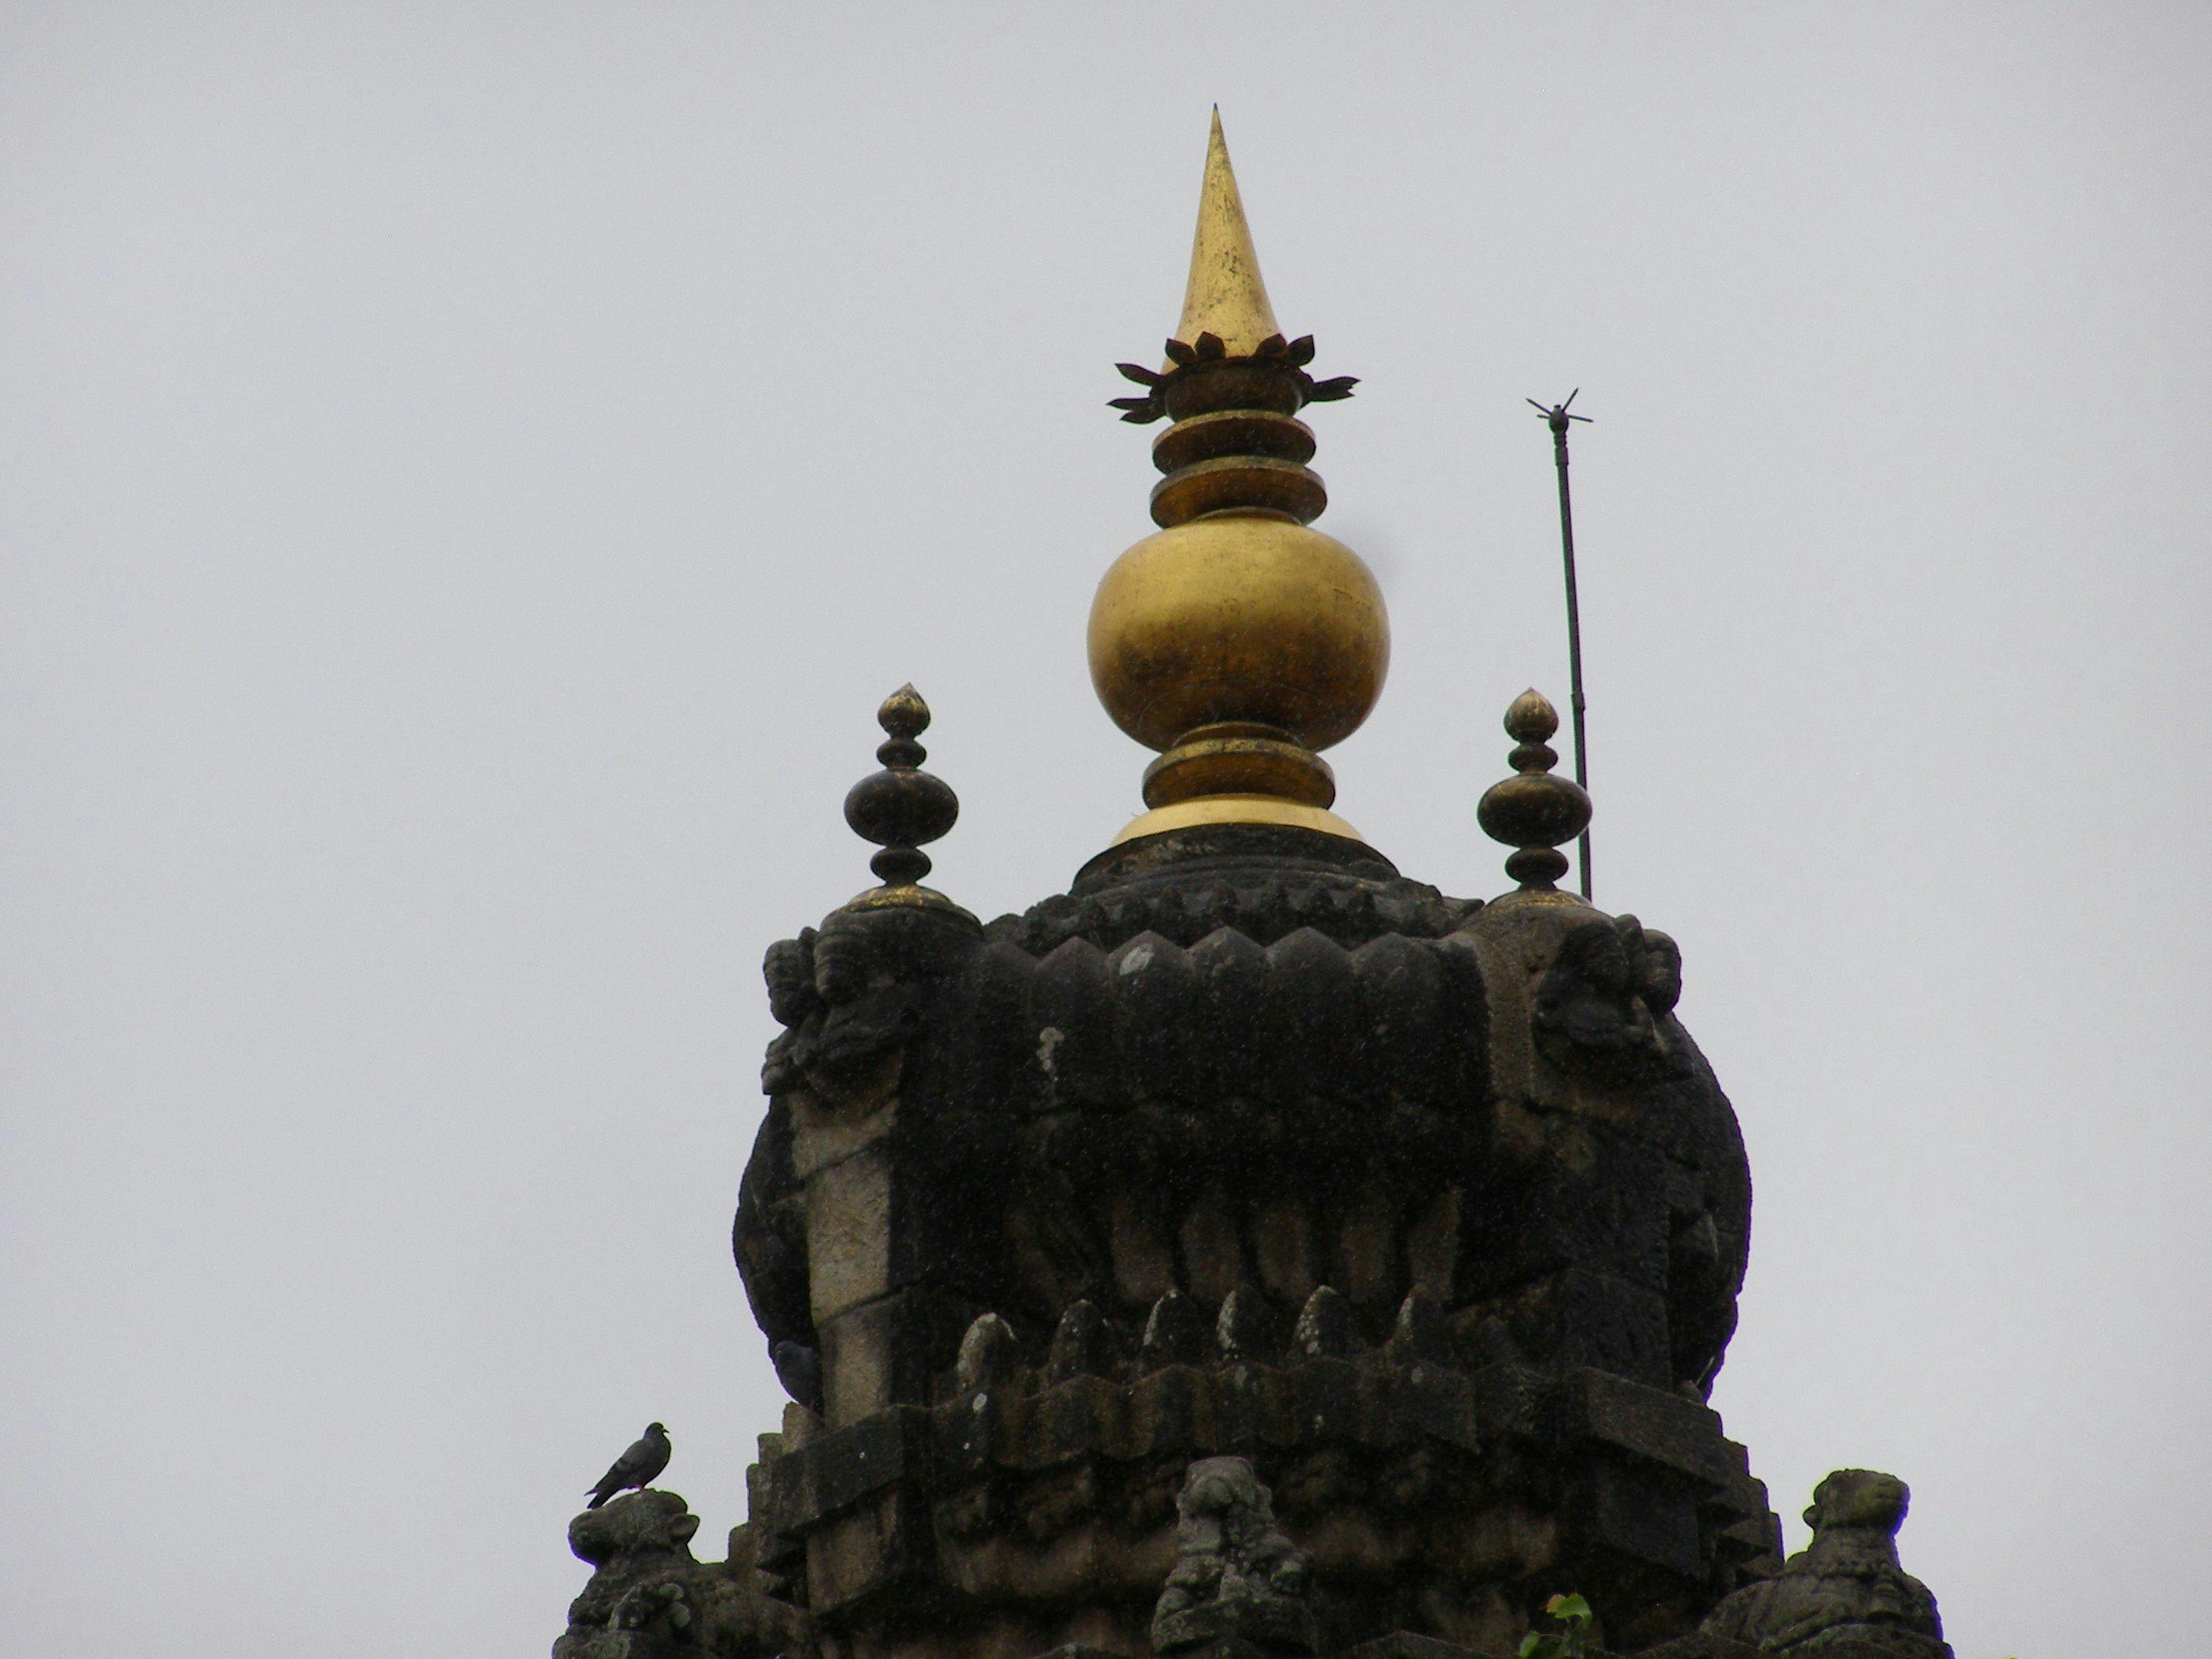 The finial crowning the spire